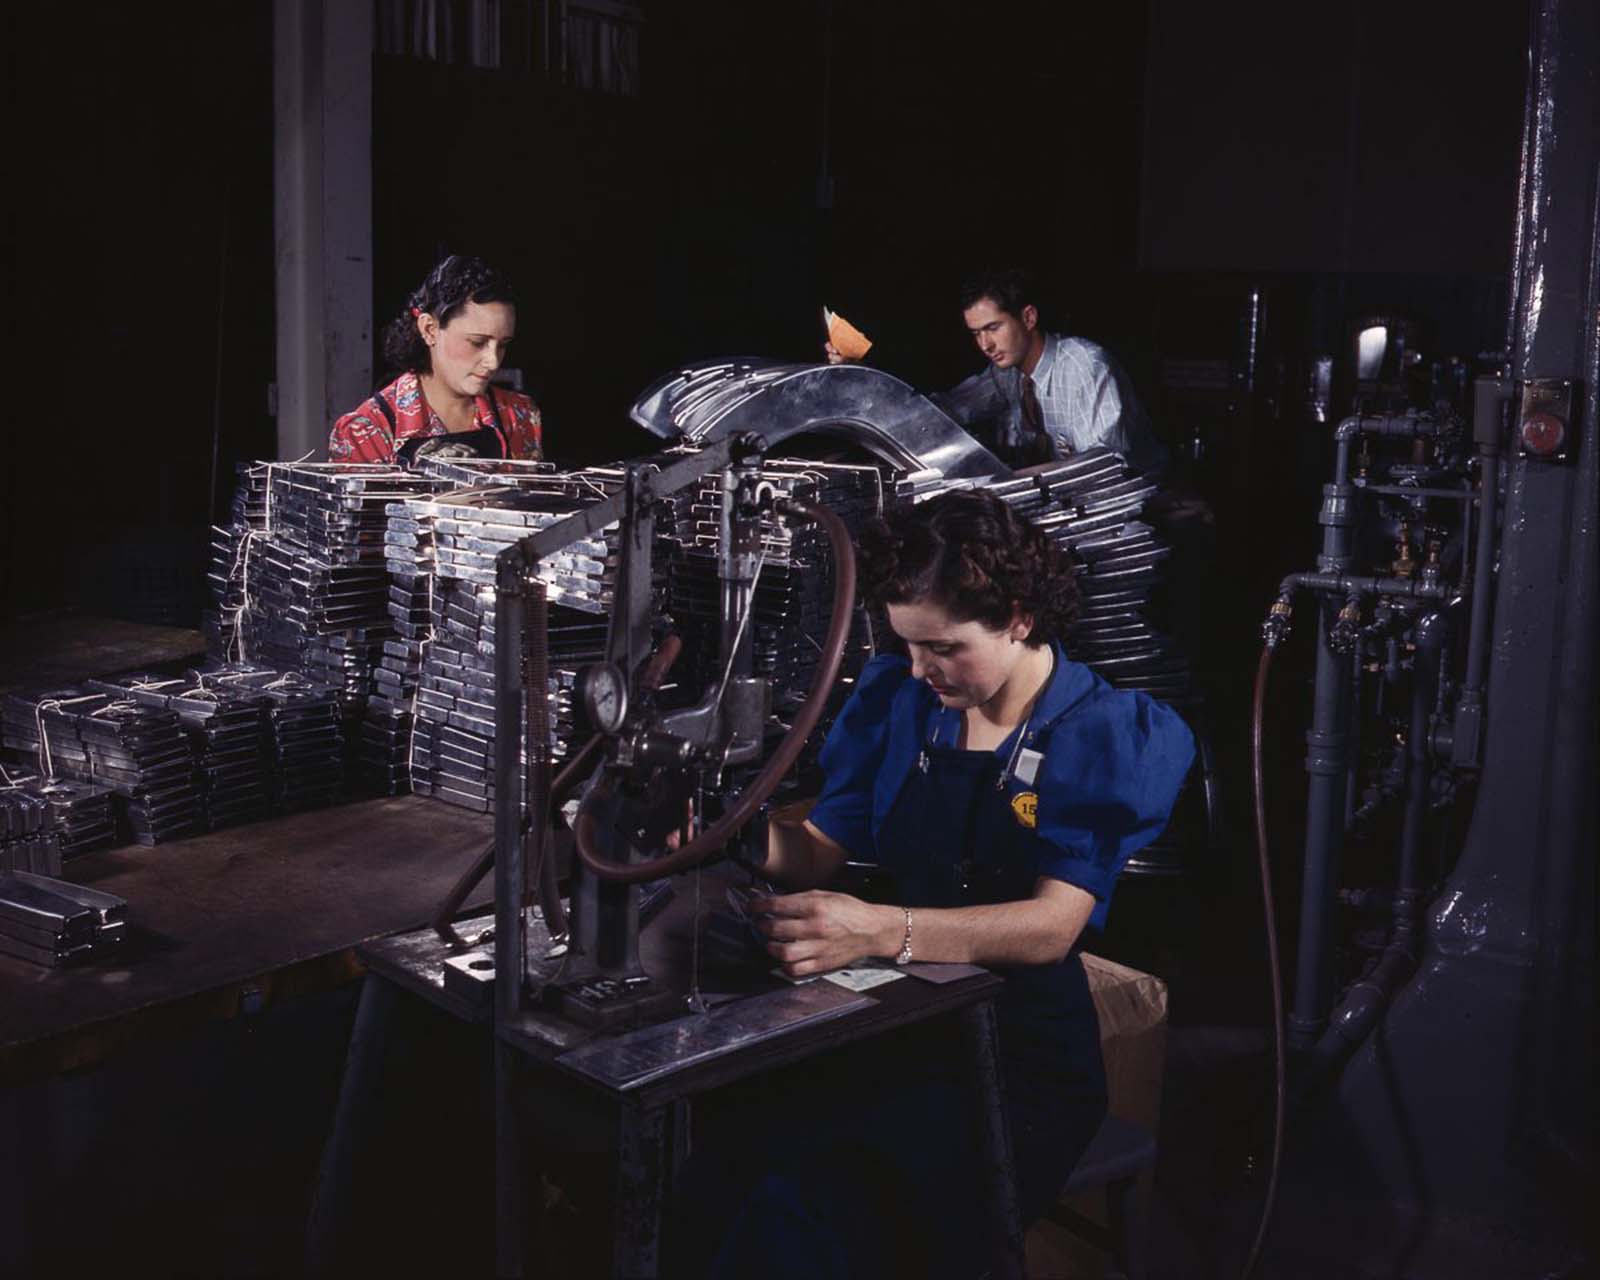 Workers feed sections of sheet metal through a pneumatic numbering machine at the North American Aviation plant in Inglewood, California, 1942.